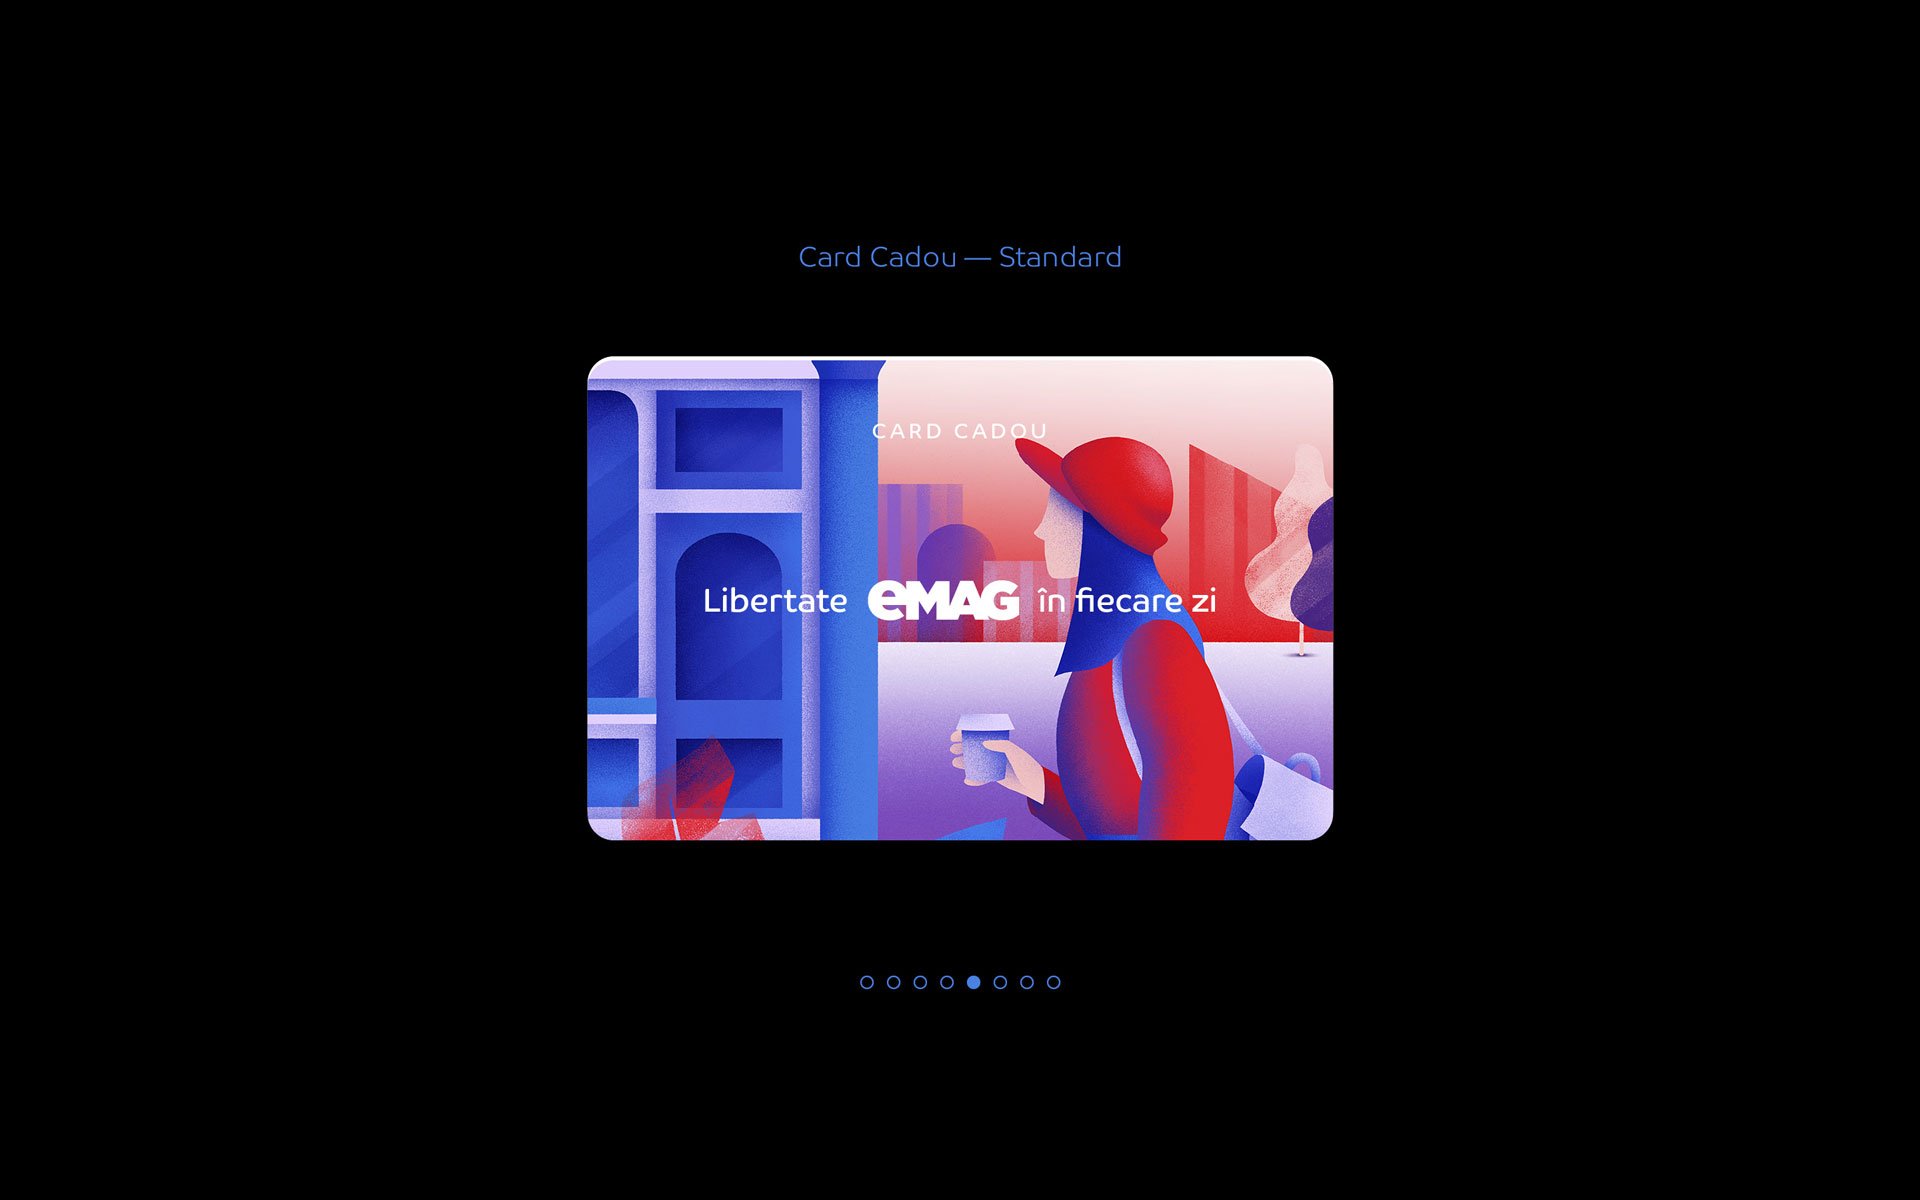 eMAG-2021-giftcards-05-1920